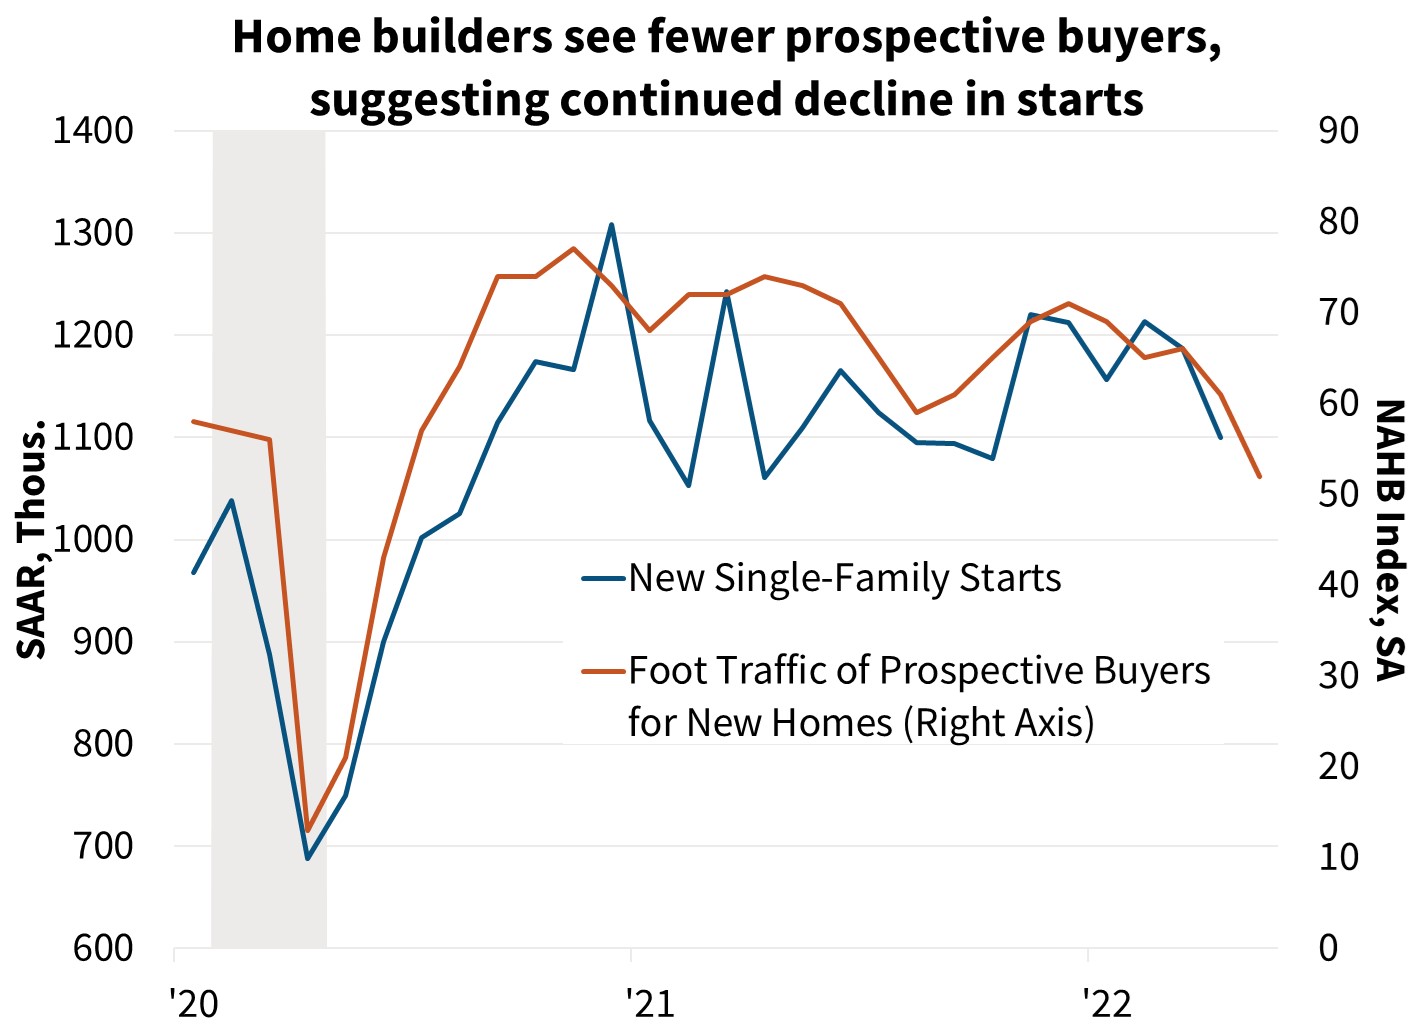  Home builders see fewer prospective buyers suggesting continued decline in starts 